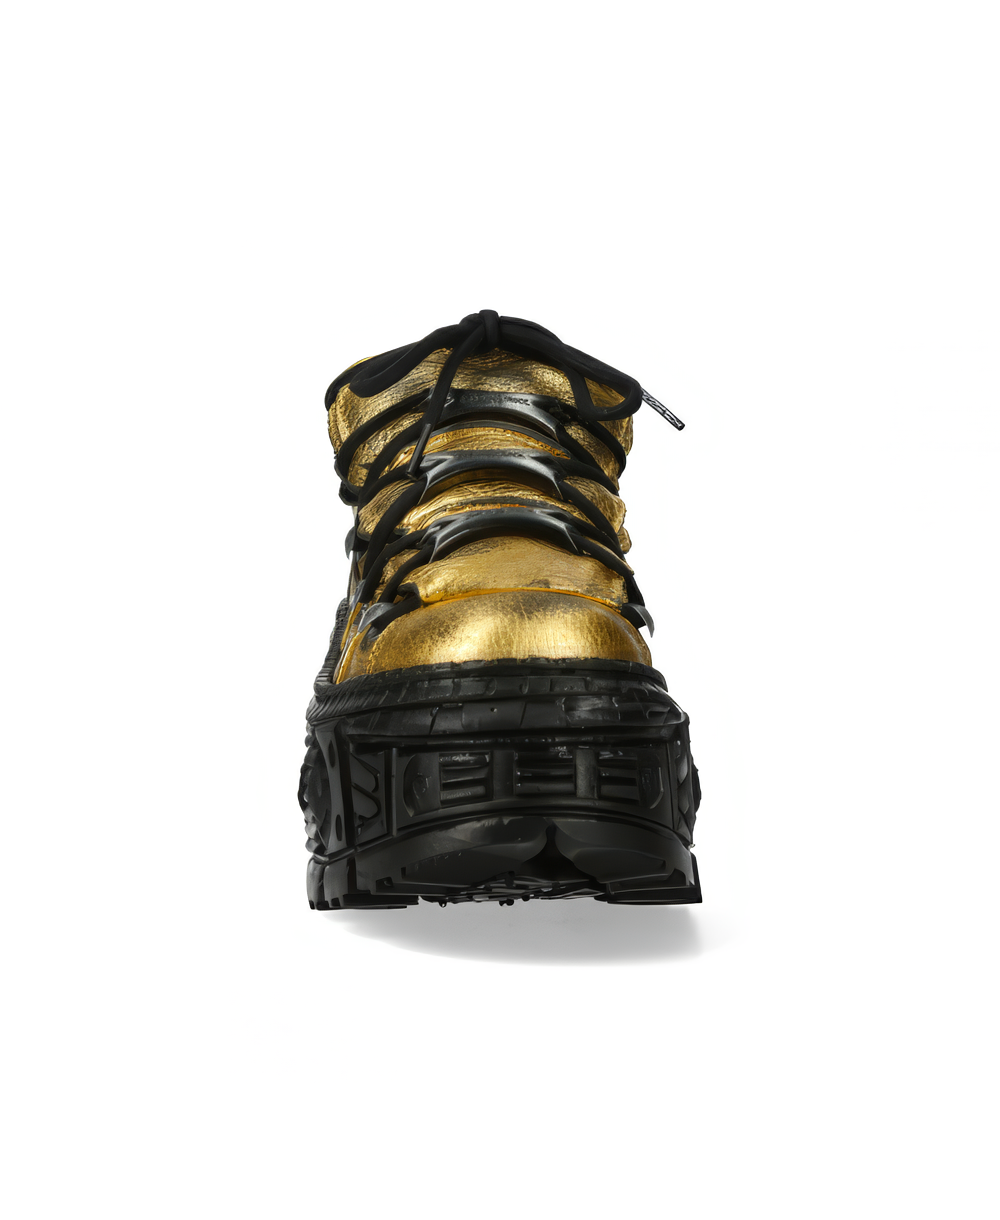 NEW ROCK Golden Rock Ankle Boots with Metallic Flair